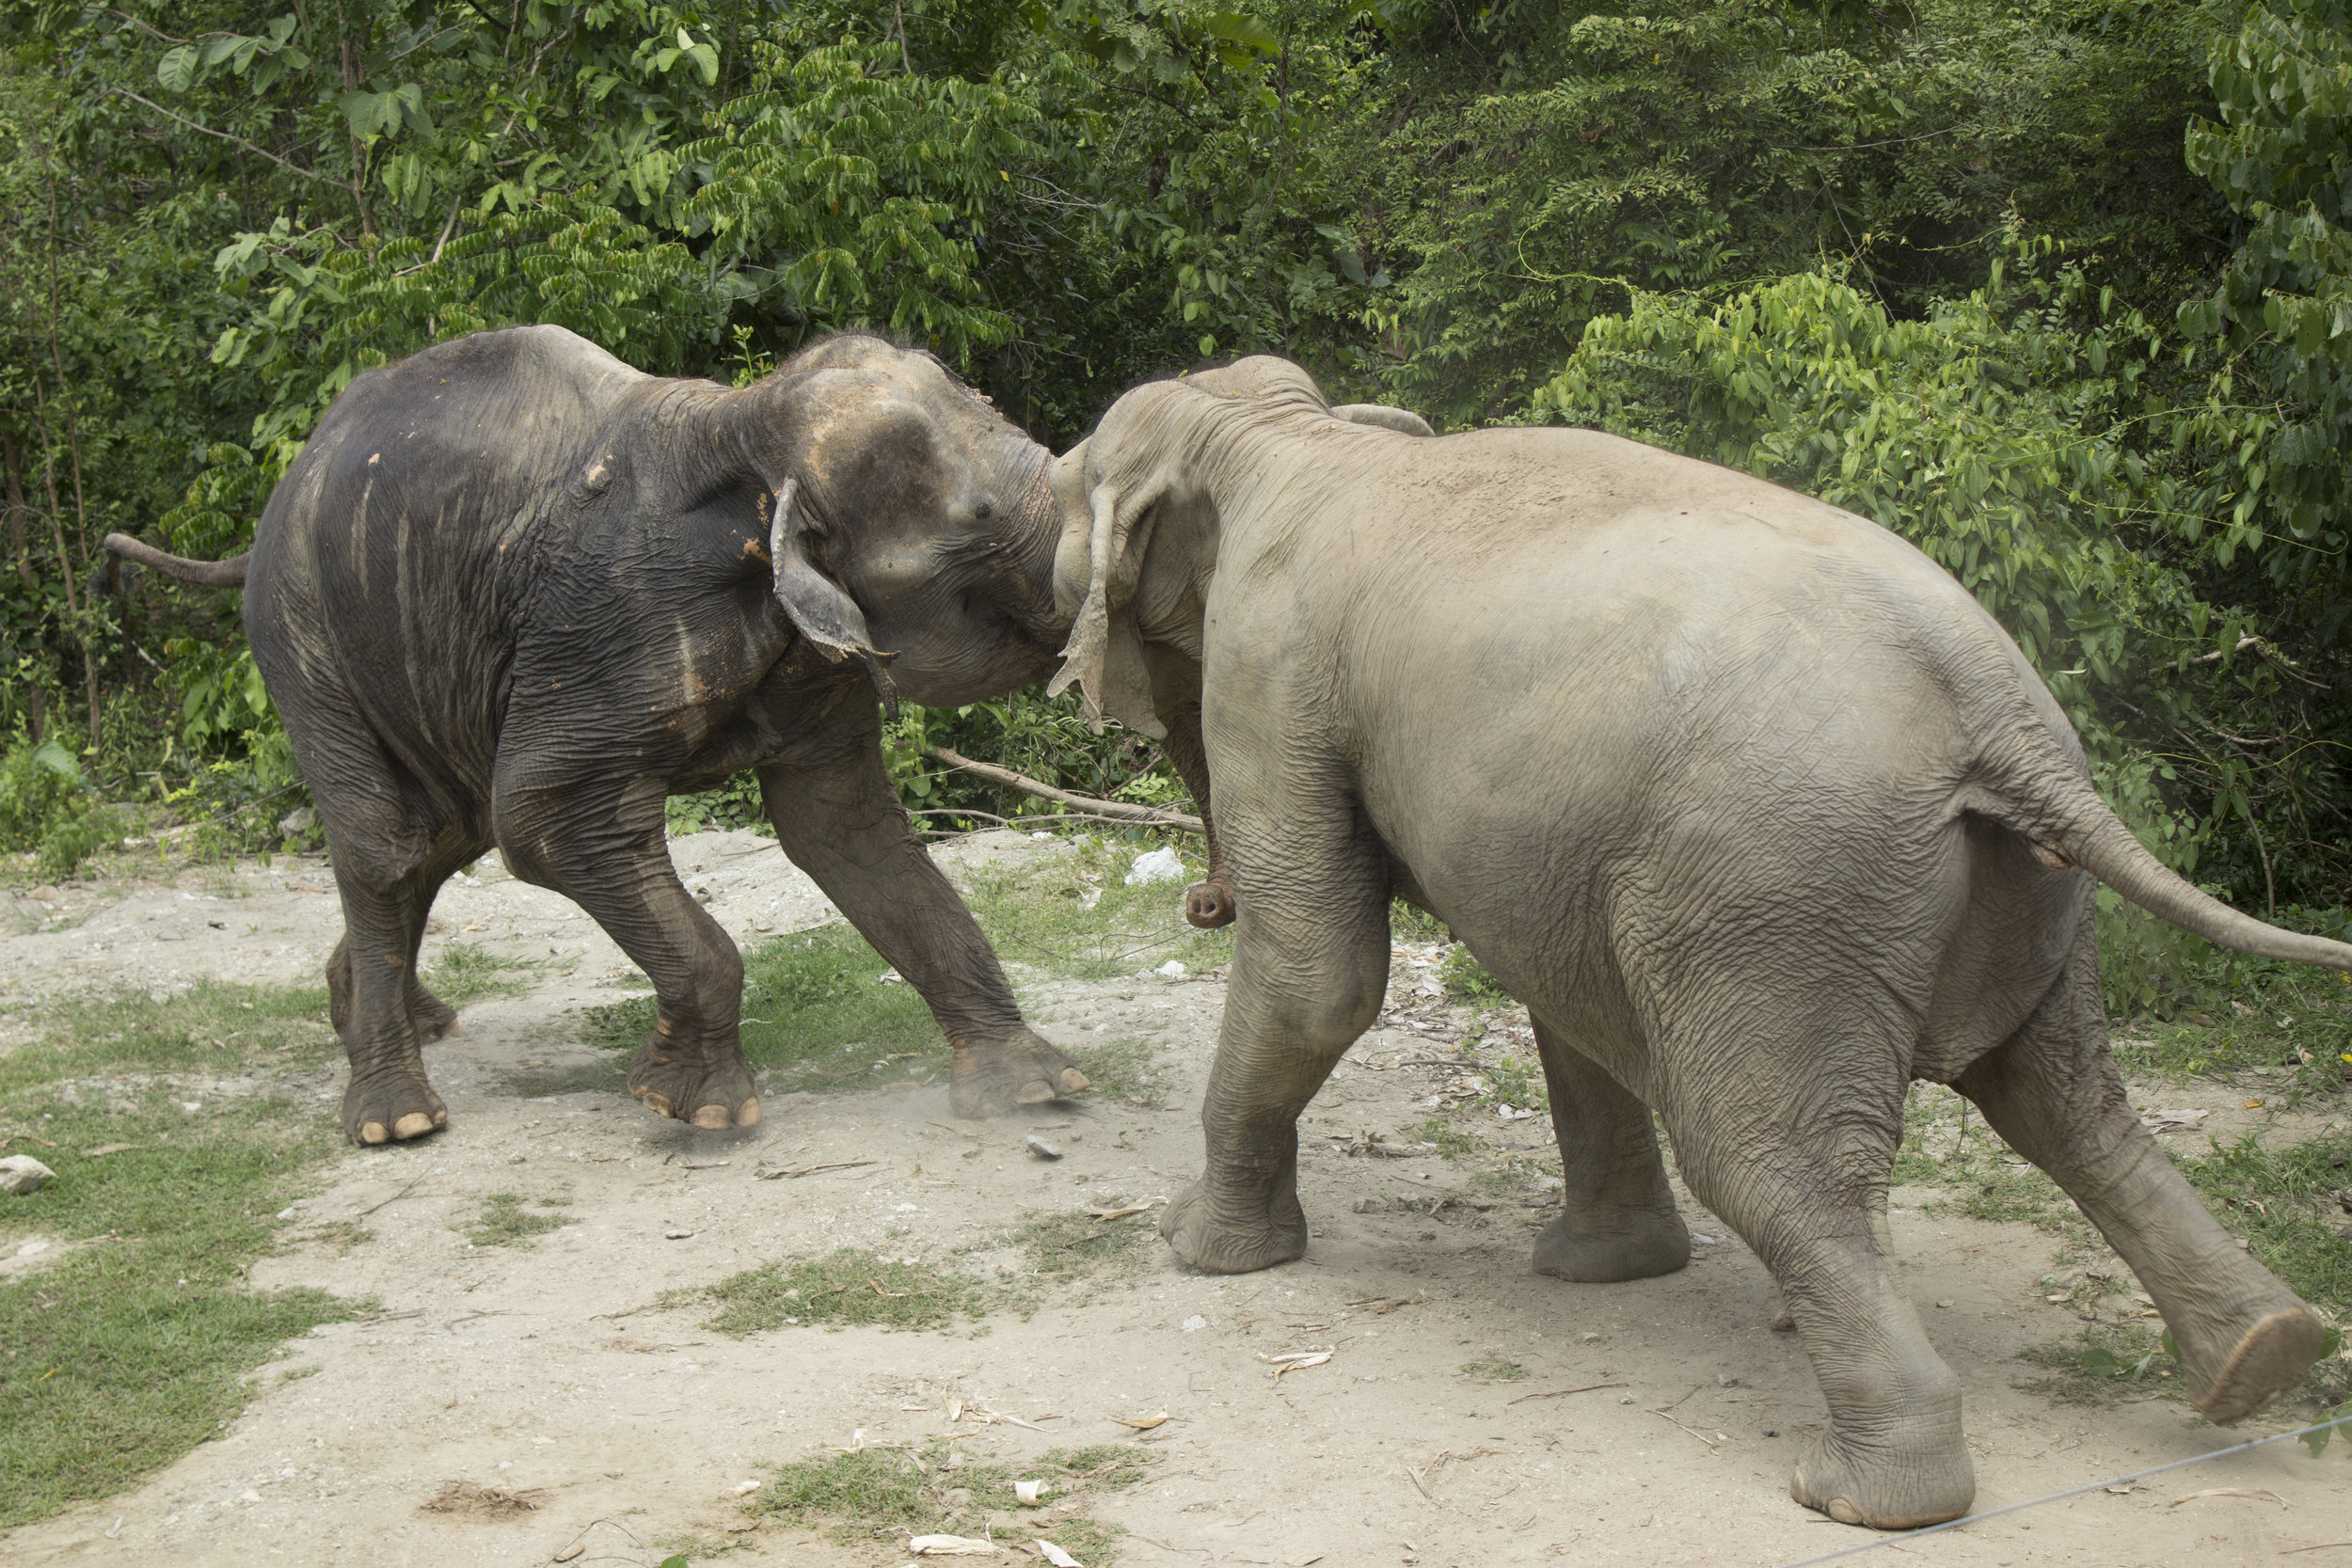  Two elephants go at it during a tense first introduction. The years of hardship are evident with the elephants’ tattered and frayed ears. 